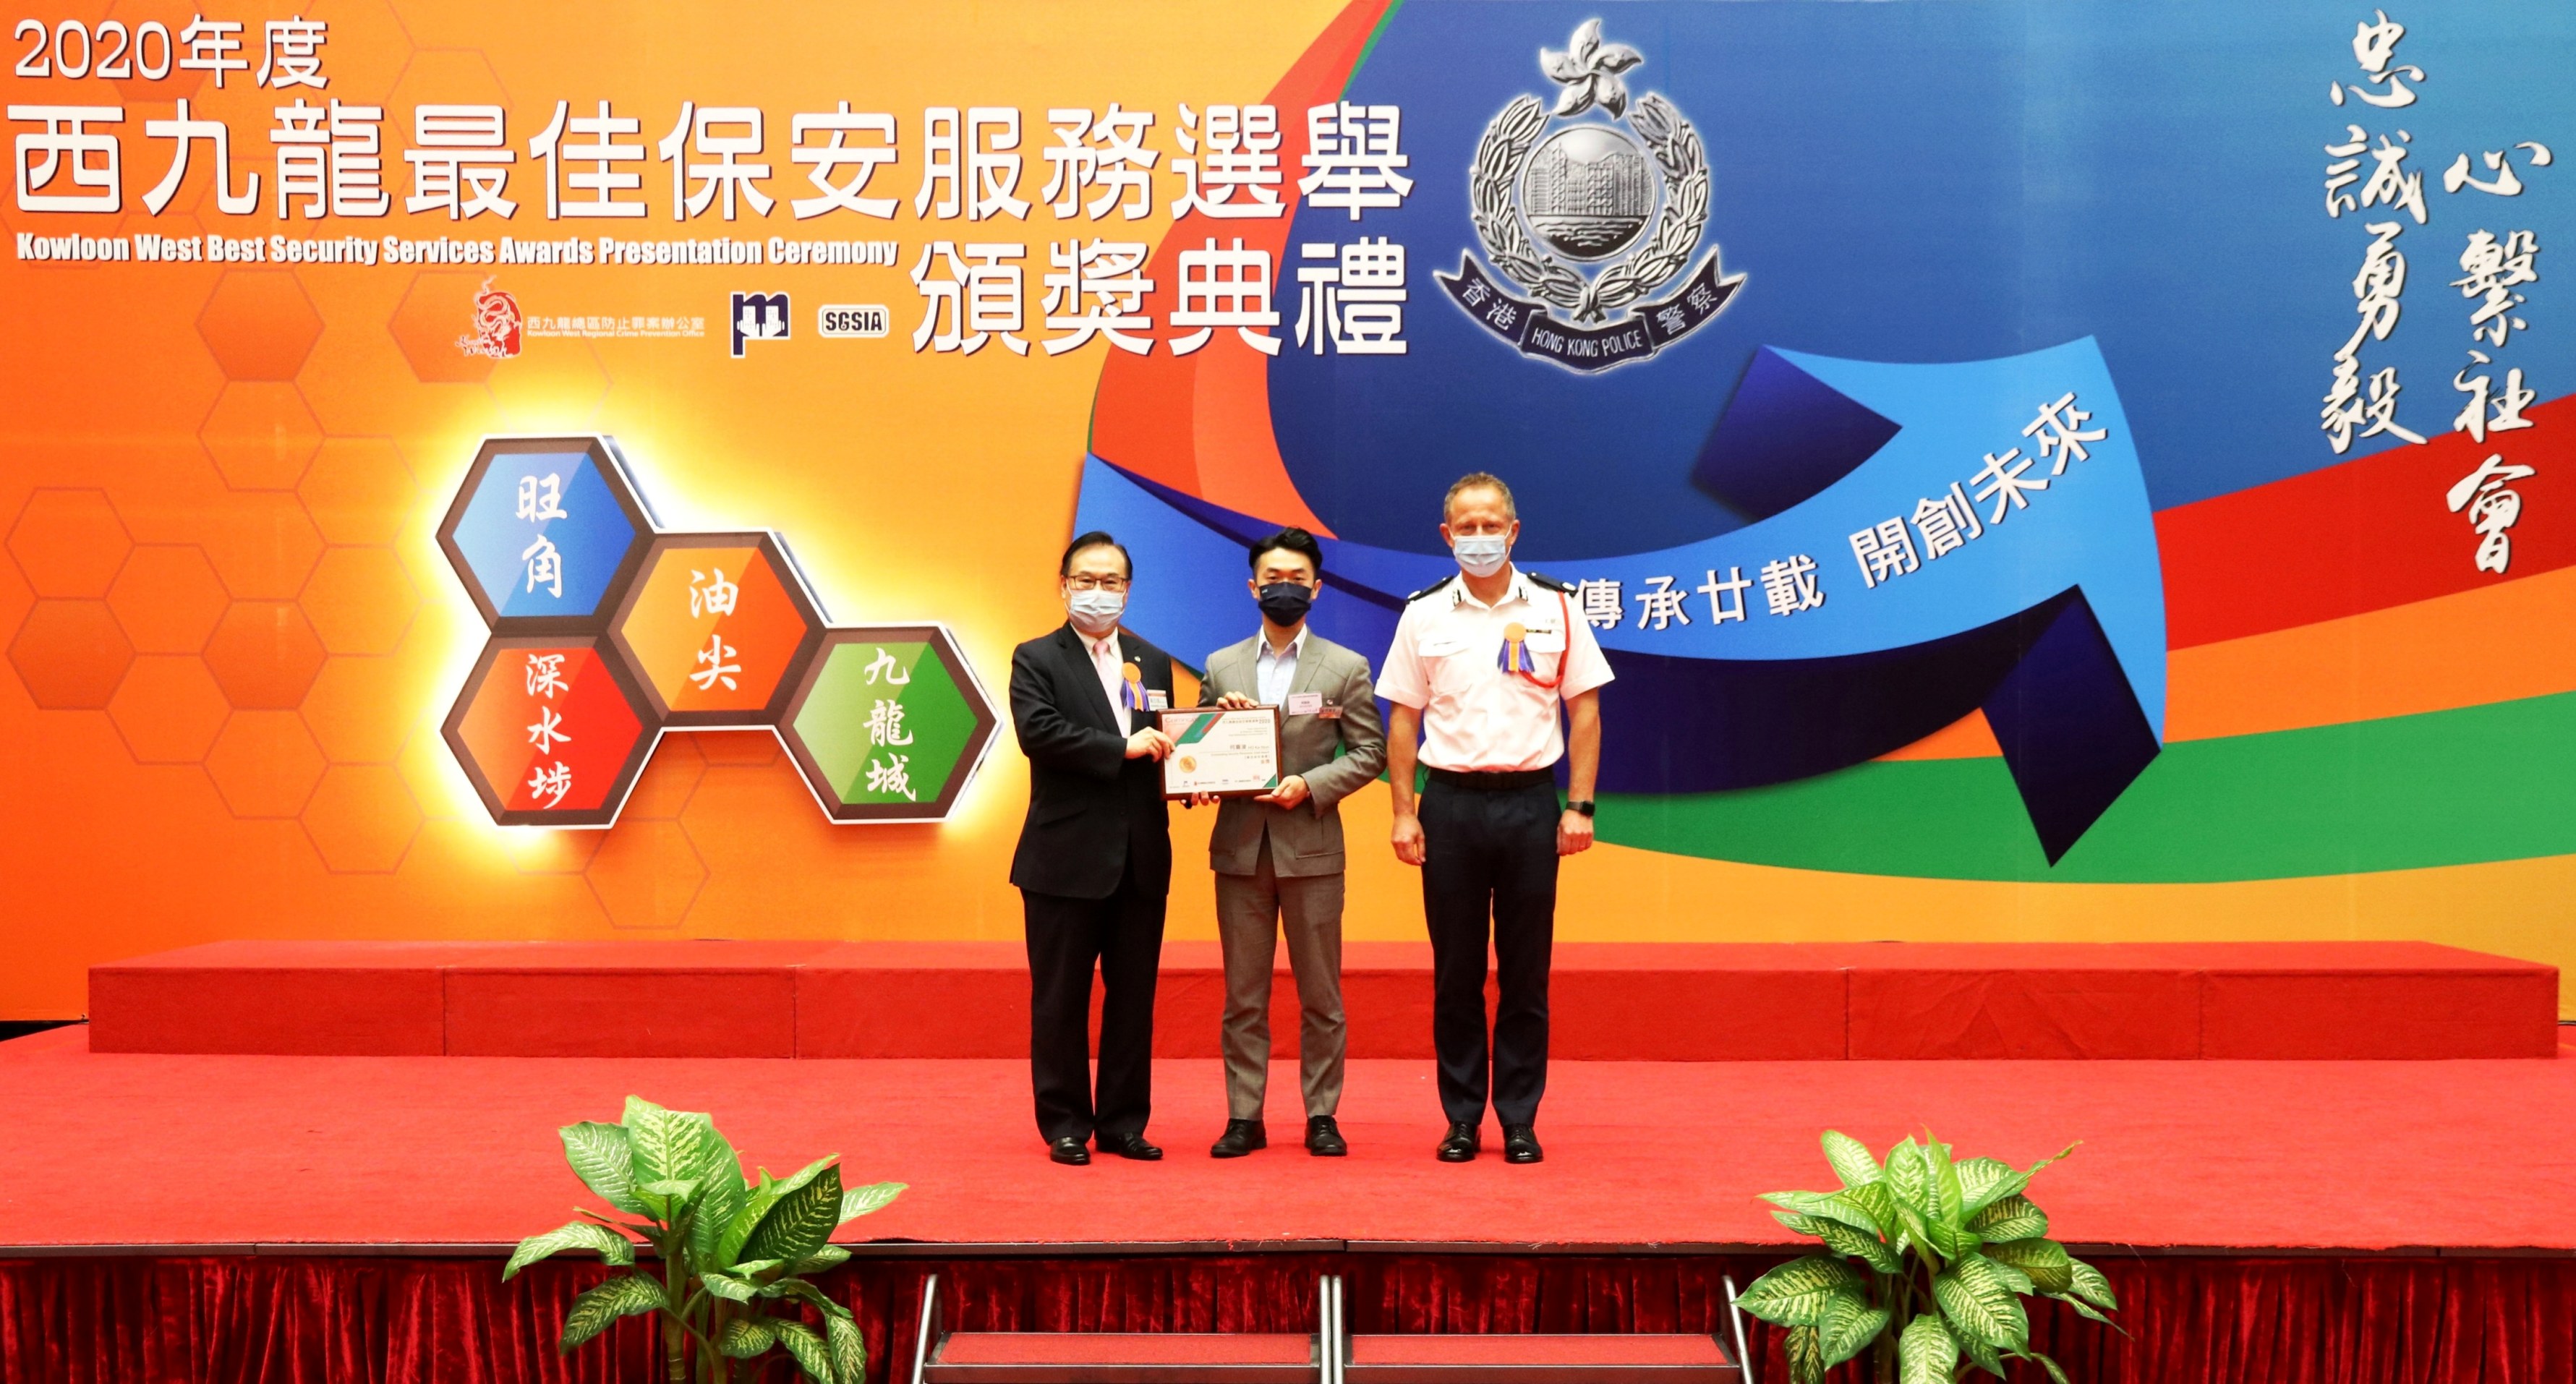 KW Regional Commander Mr. Rupert Dover (right) and Dr. Johnnie CHAN (left)
					with the gold award winner
					